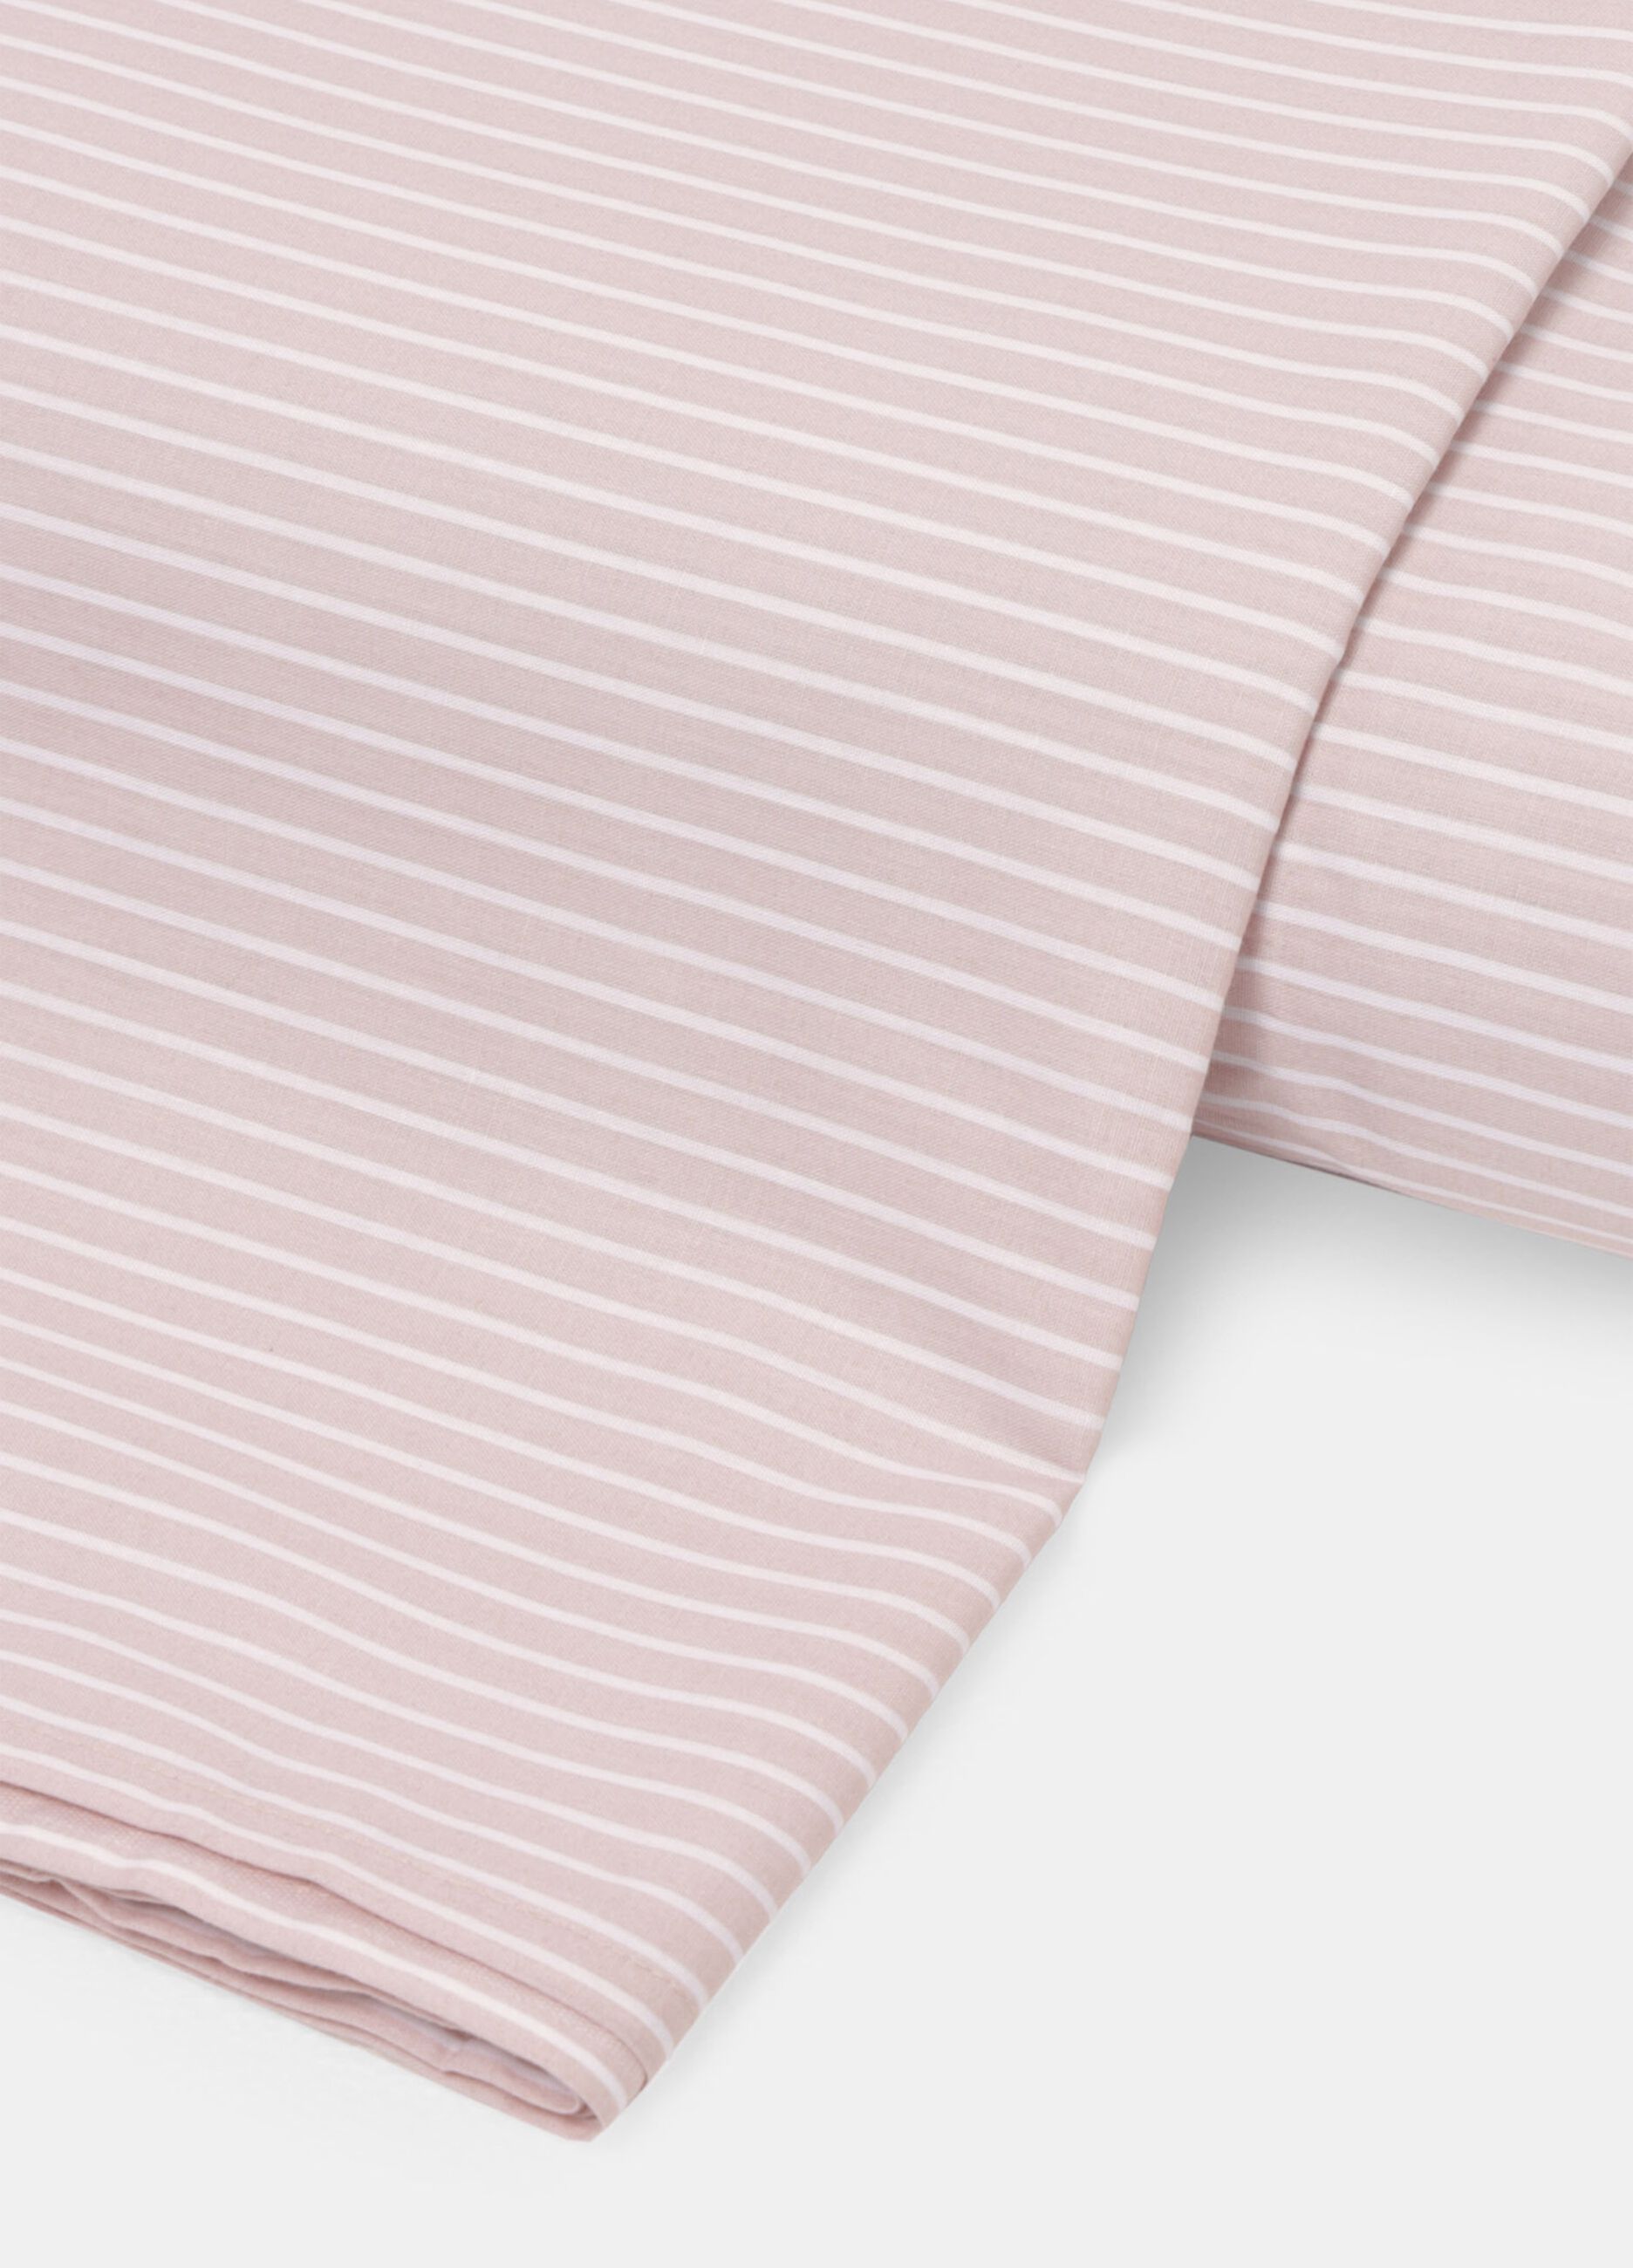 Striped single-bed duvet cover in cotton